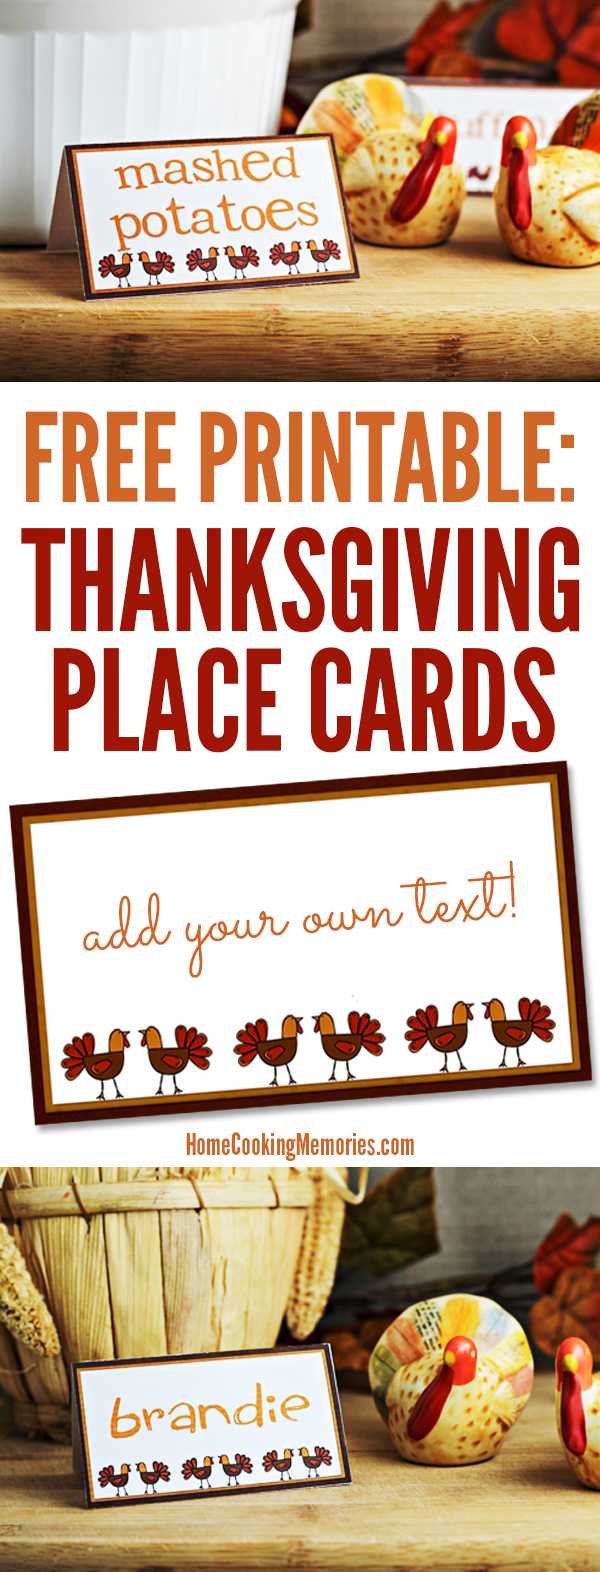 Free Printables: Thanksgiving Place Cards - Home Cooking Throughout Thanksgiving Place Cards Template